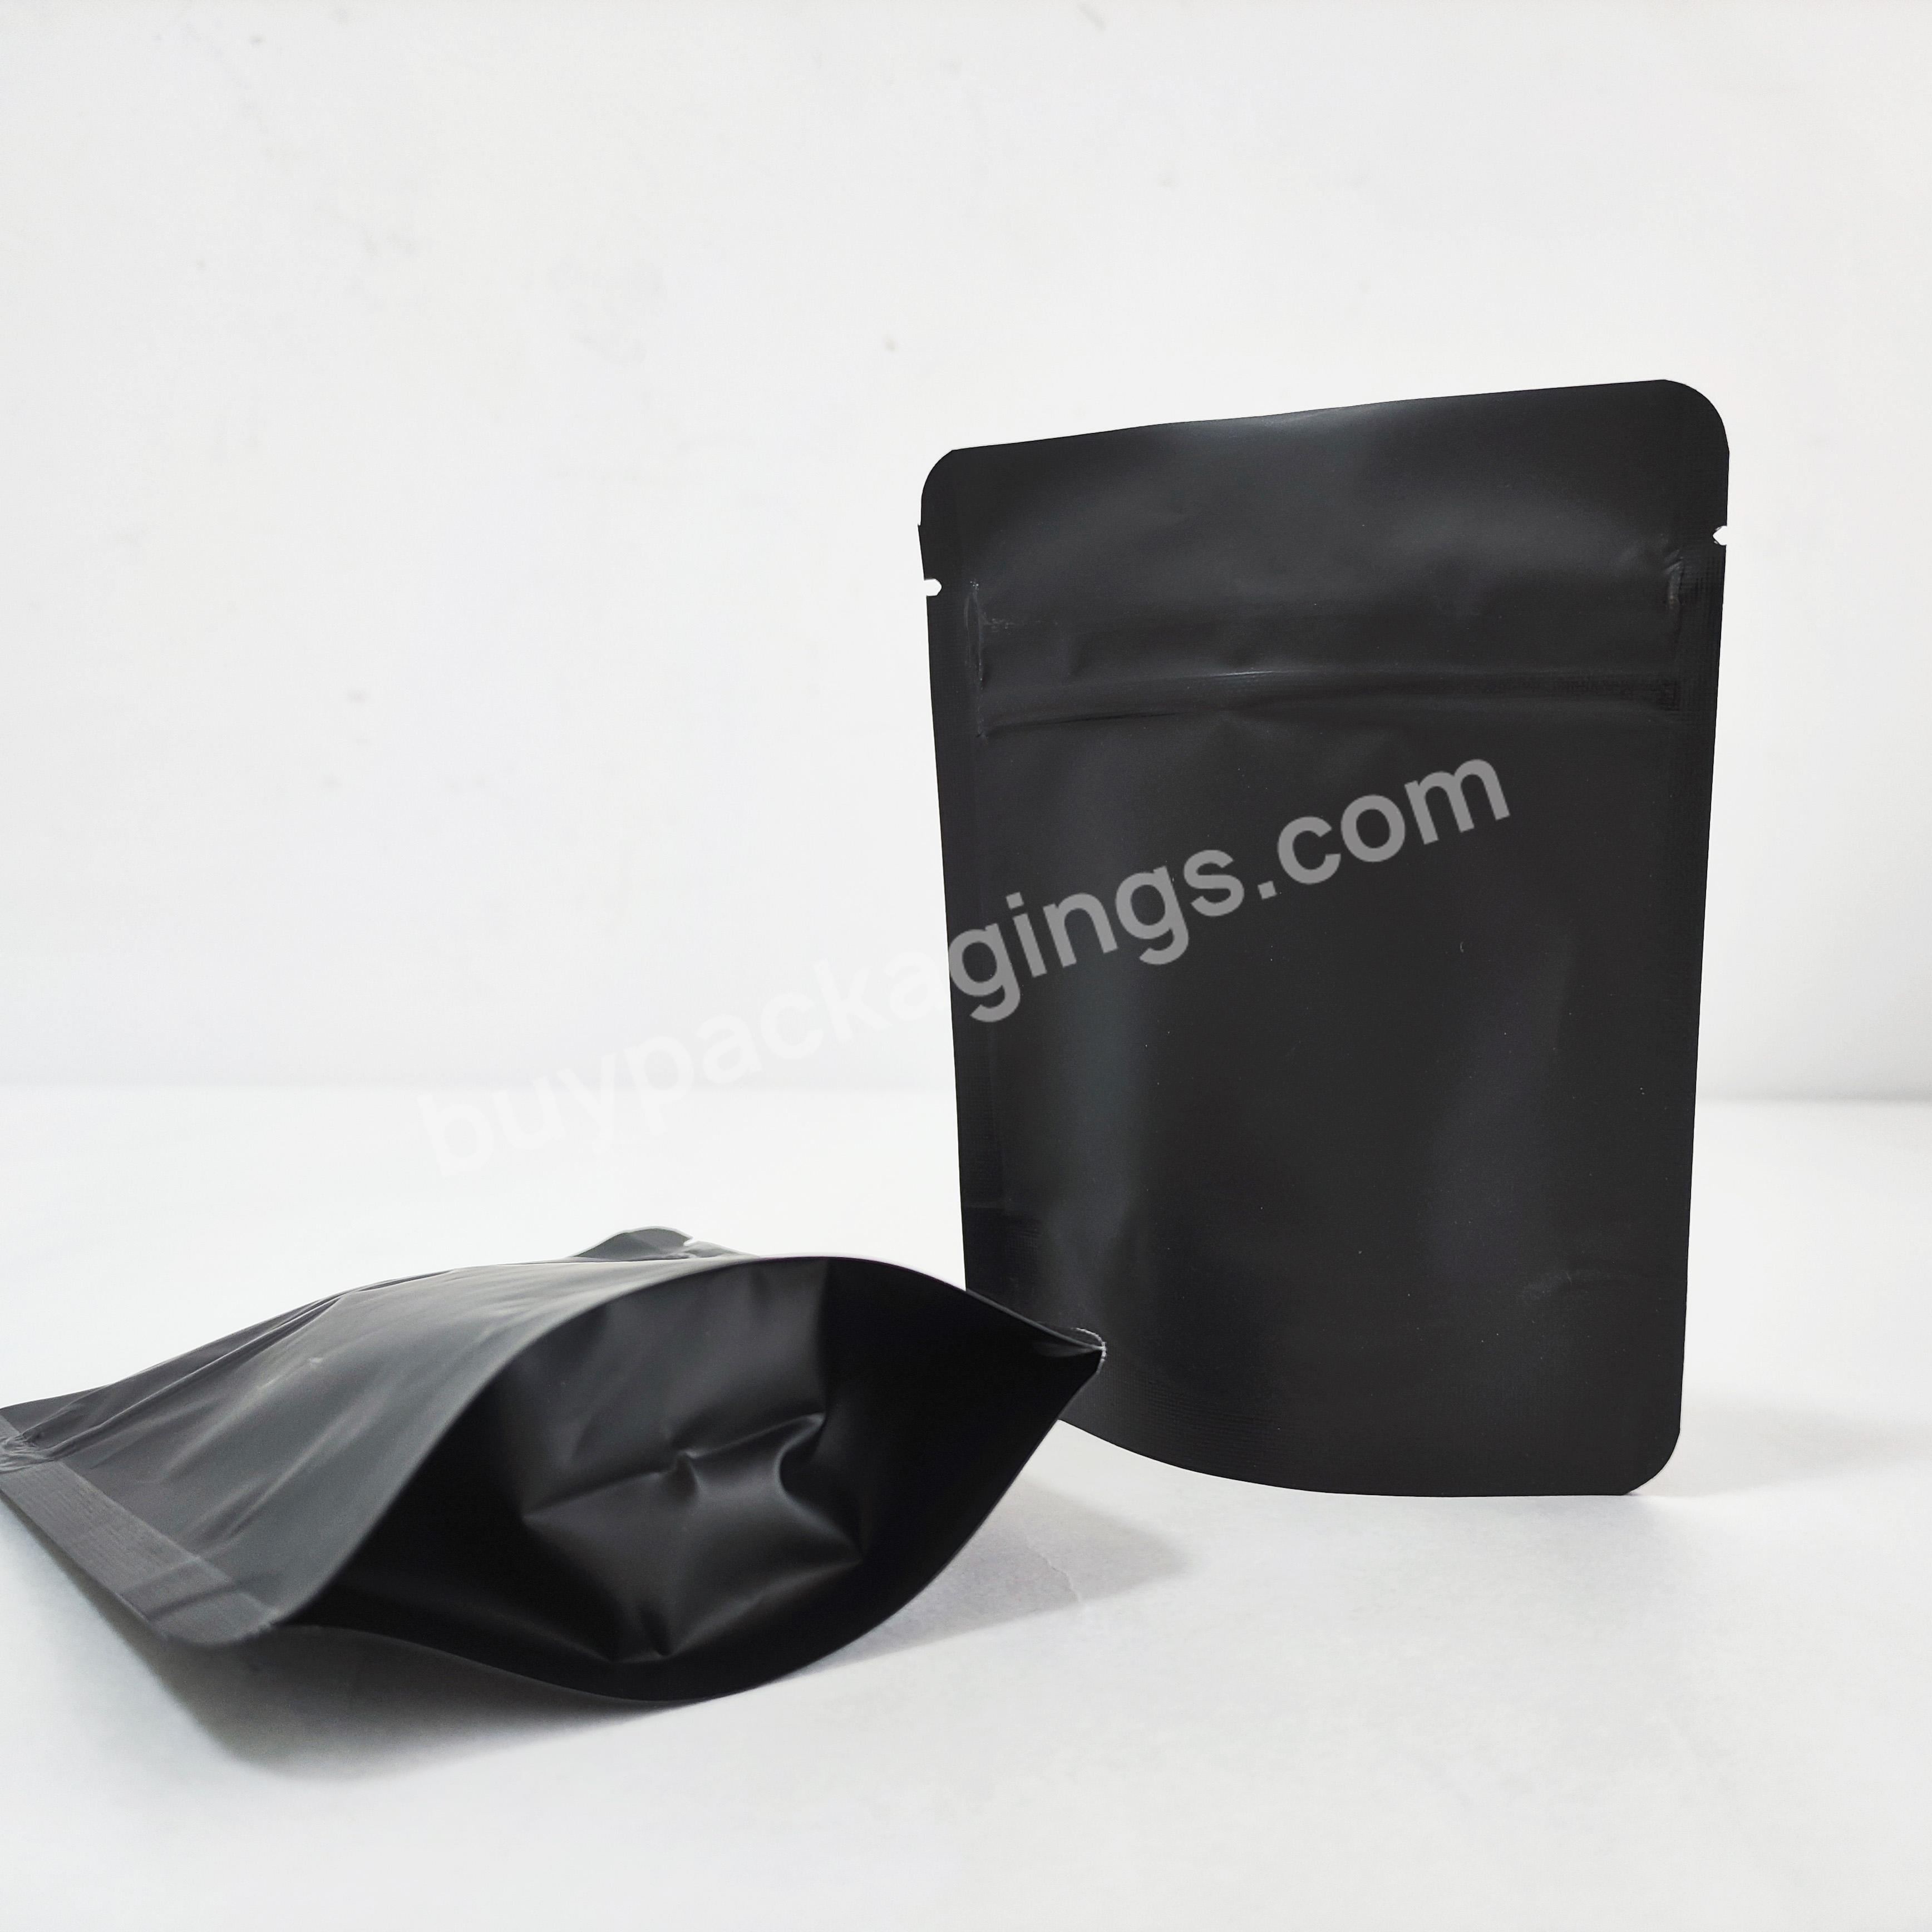 Stand Up Pouch Child Resistance Mylar Bags 3.5 Customized Logo Smell Proof Mylar Bags Zipper Top 1 Gram Mylar Bags